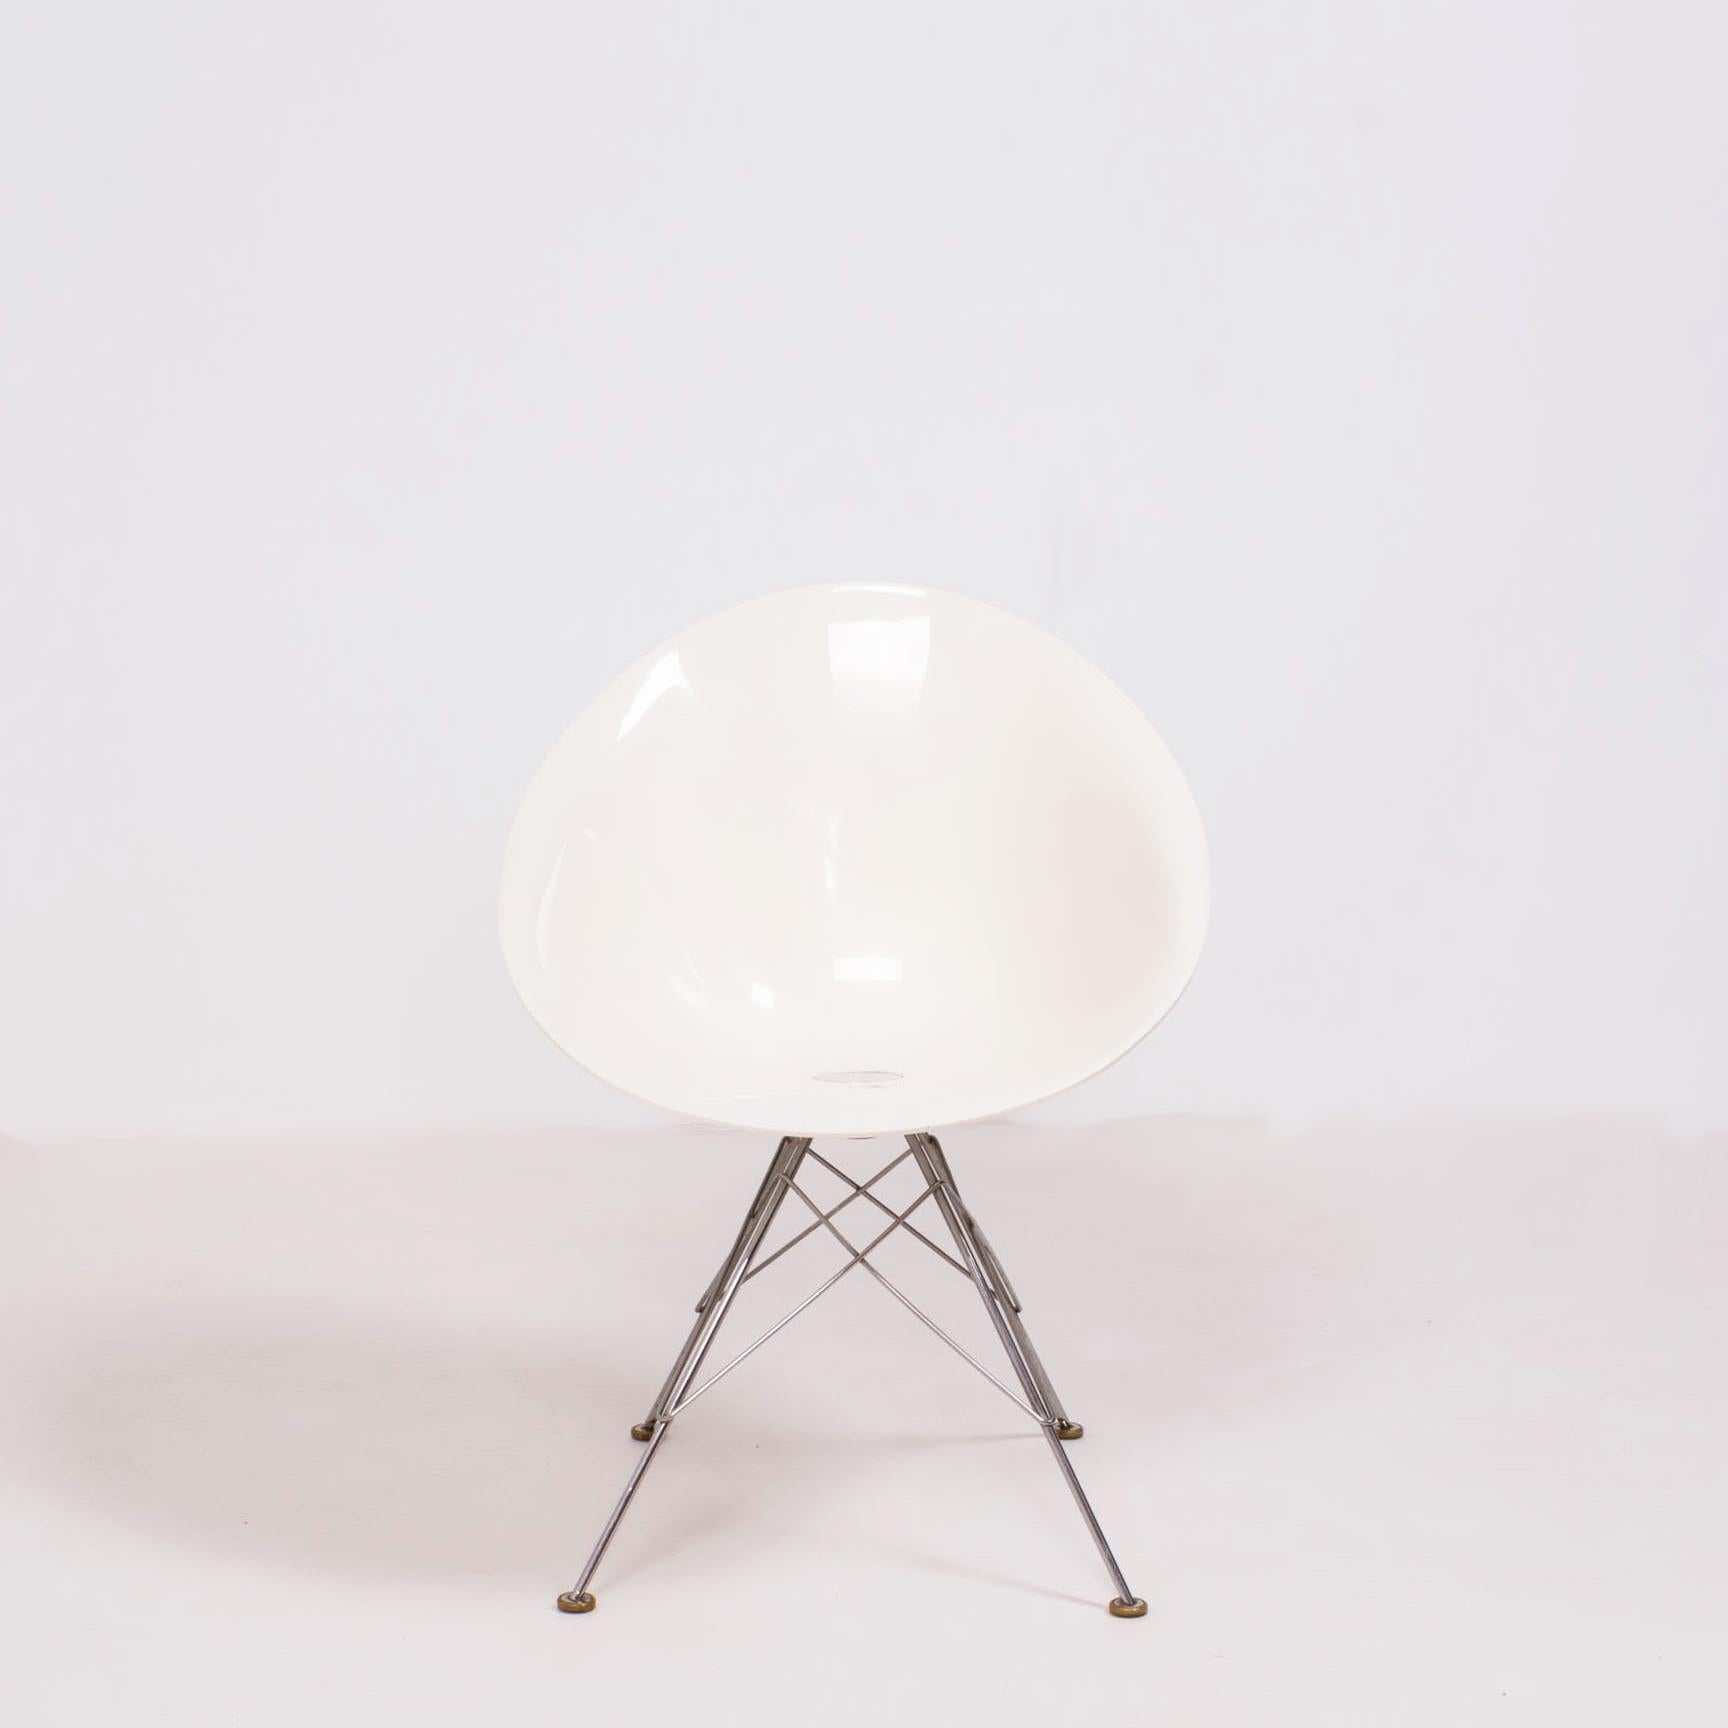 Originally designed by Philippe Starck for Kartell in 1999 the Ero/S chair is inspired by the 1960s but has quickly become a modern design Classic.

With an organic shape, the oval seat is constructed from white Polycarbonate that sits atop a